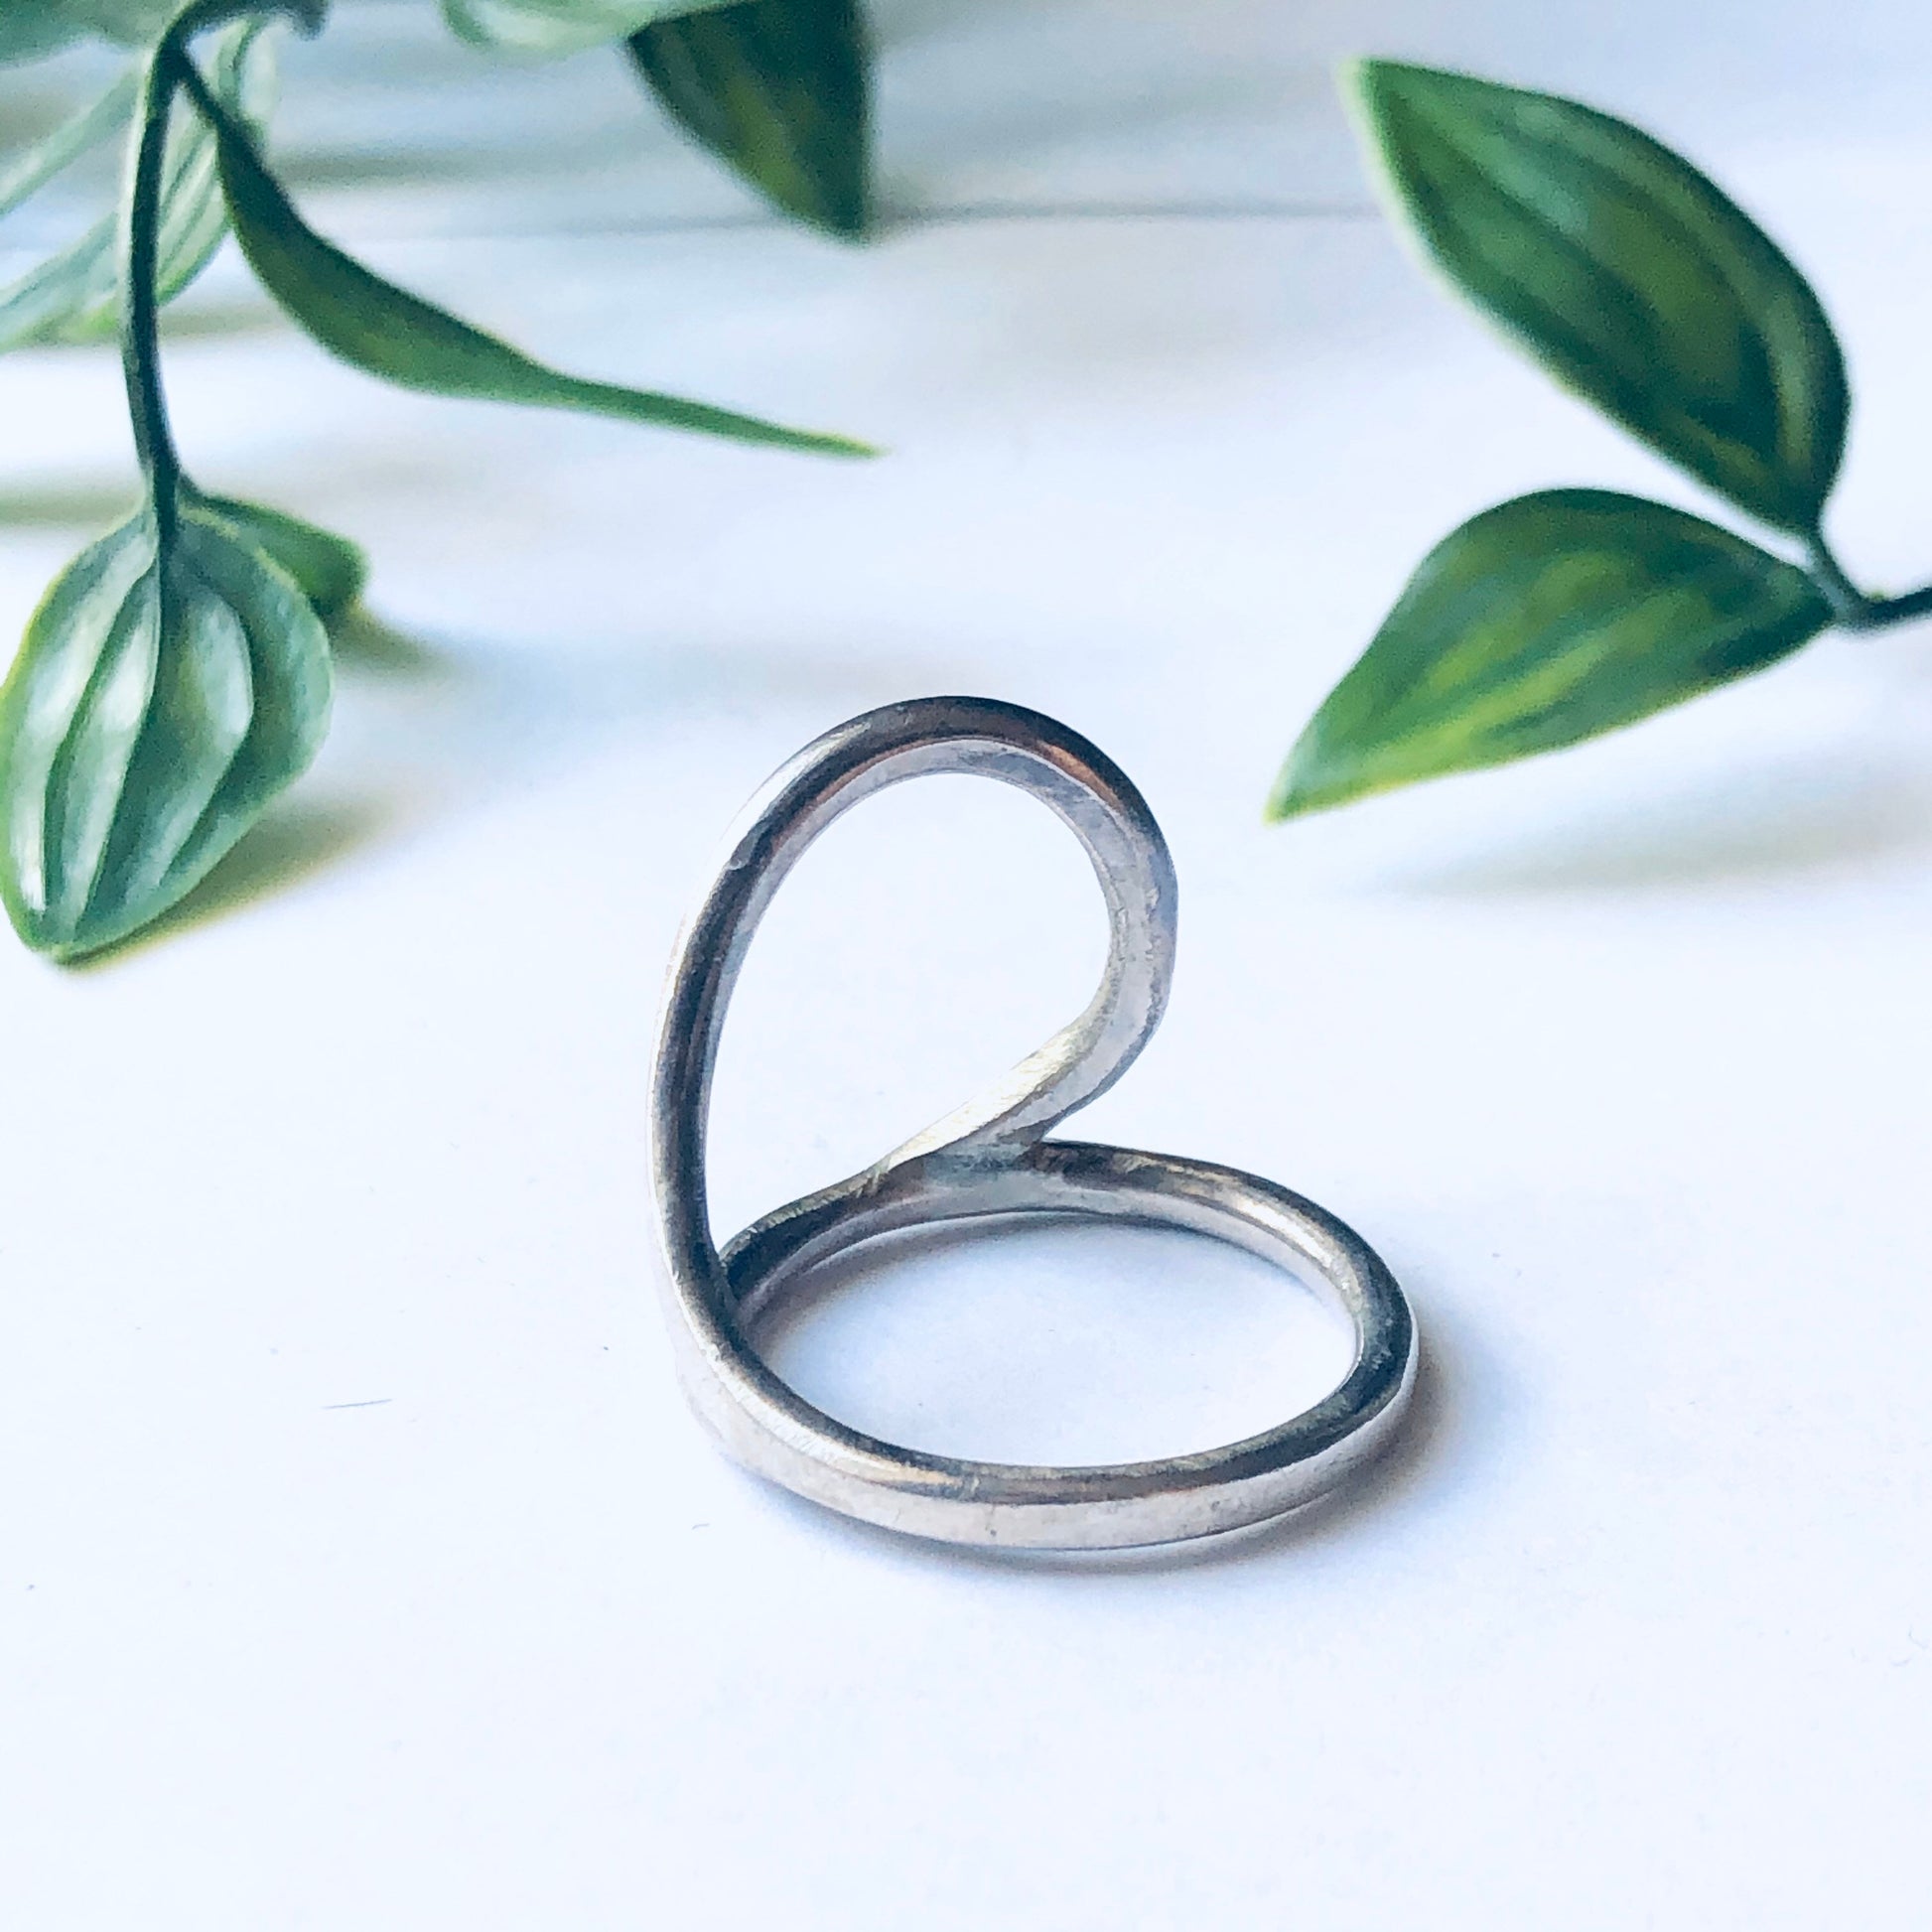 Vintage silver cut out ring with minimalist style and abstract design, displayed beside green leaves for a natural aesthetic.